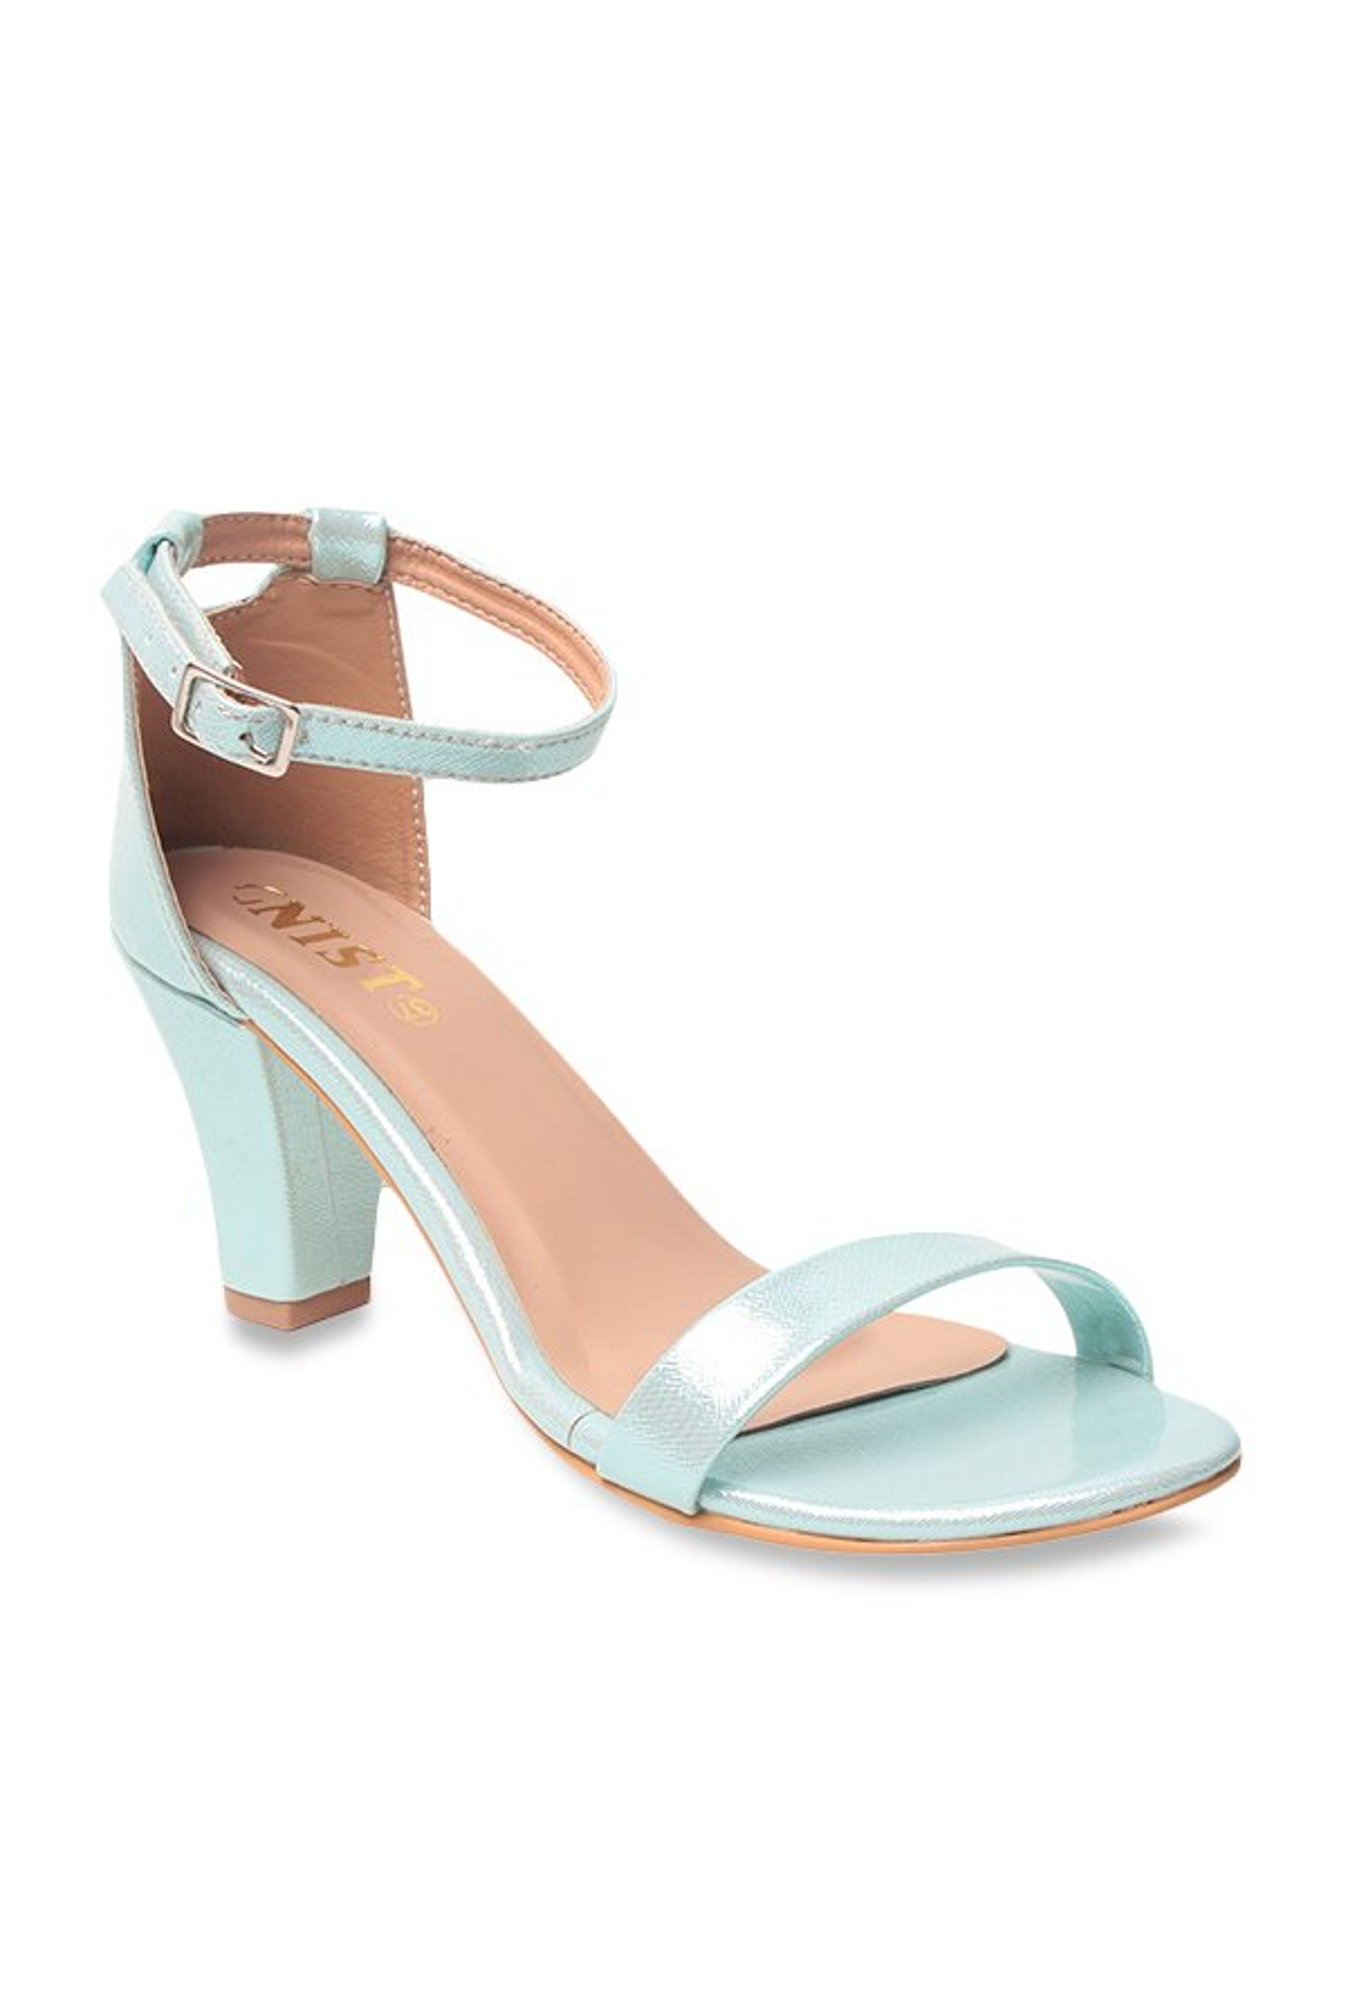 turquoise ankle strap heels